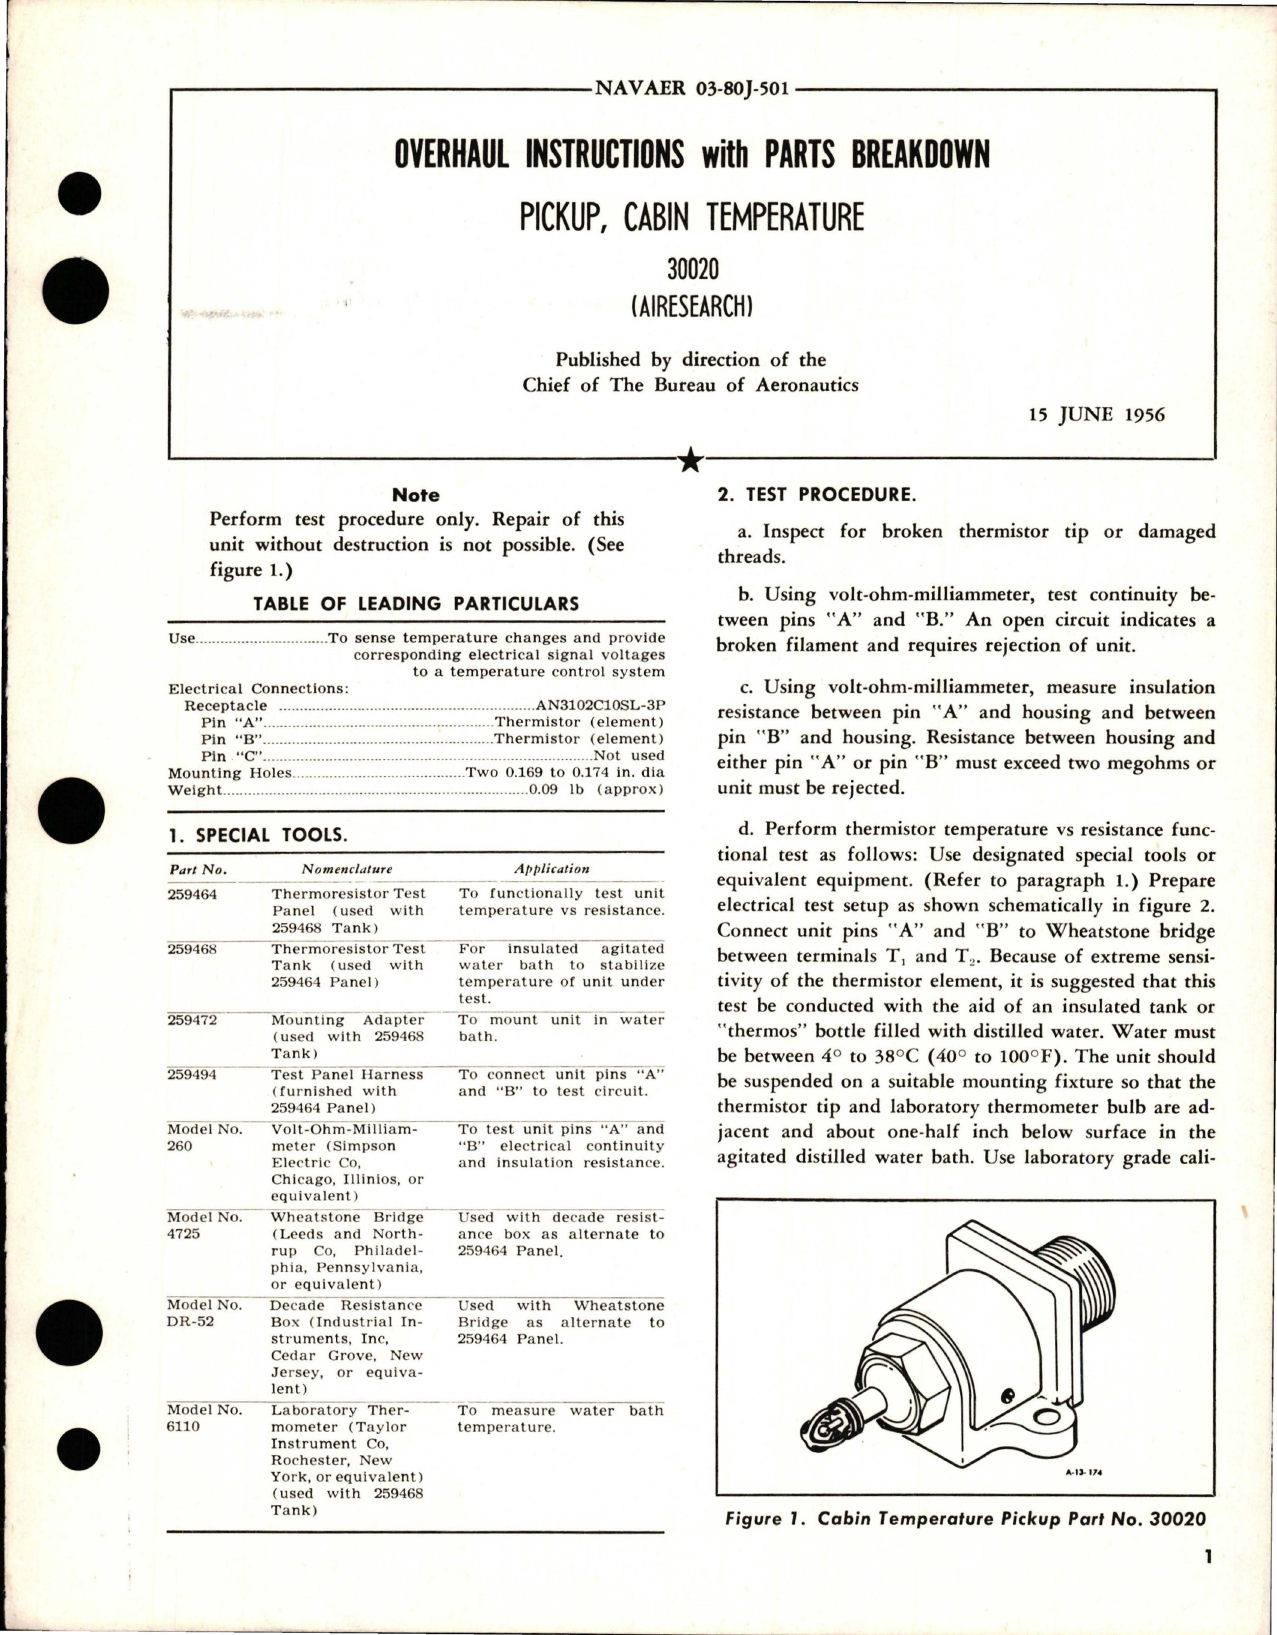 Sample page 1 from AirCorps Library document: Overhaul Instructions with Parts Breakdown for Cabin Temperature Pickup - 30020